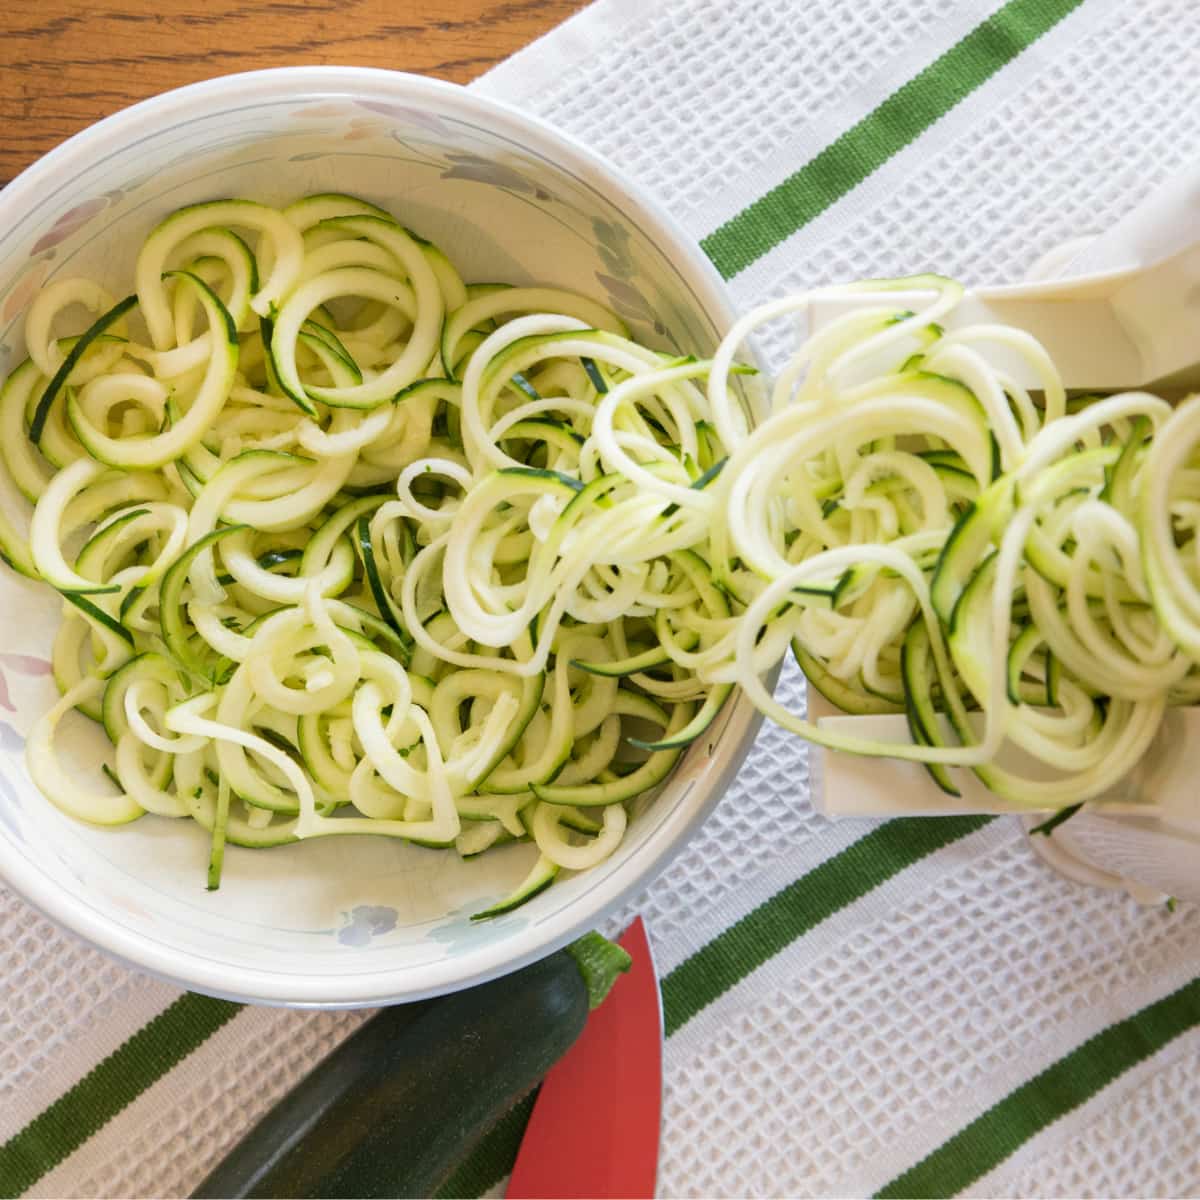 A bowl of zucchini noodles.